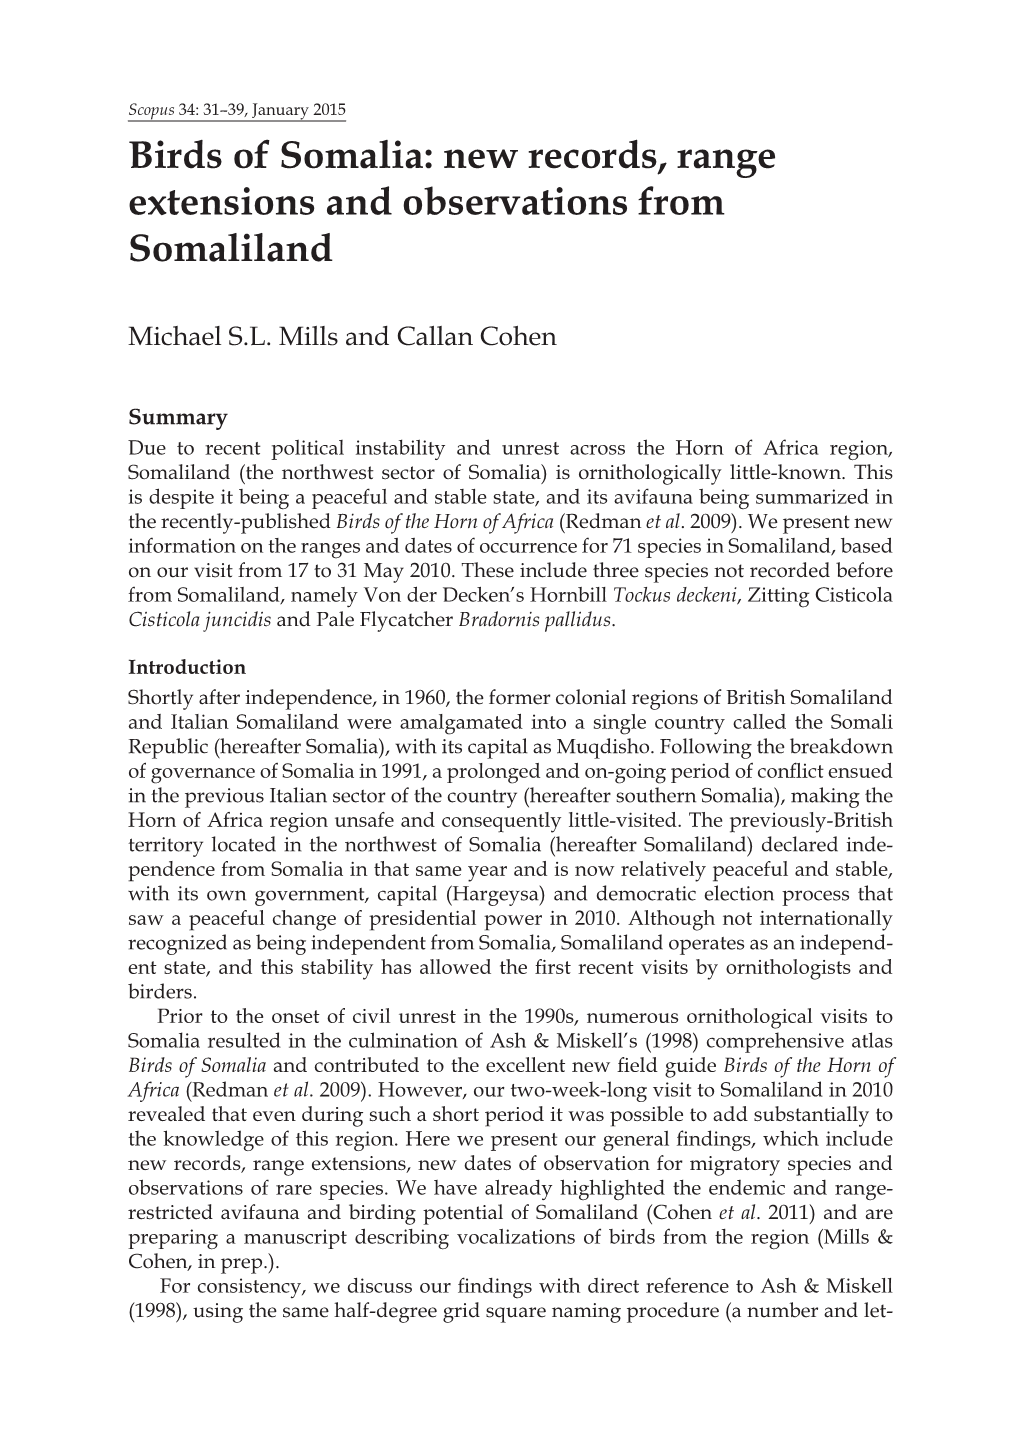 Birds of Somalia: New Records, Range Extensions and Observations from Somaliland